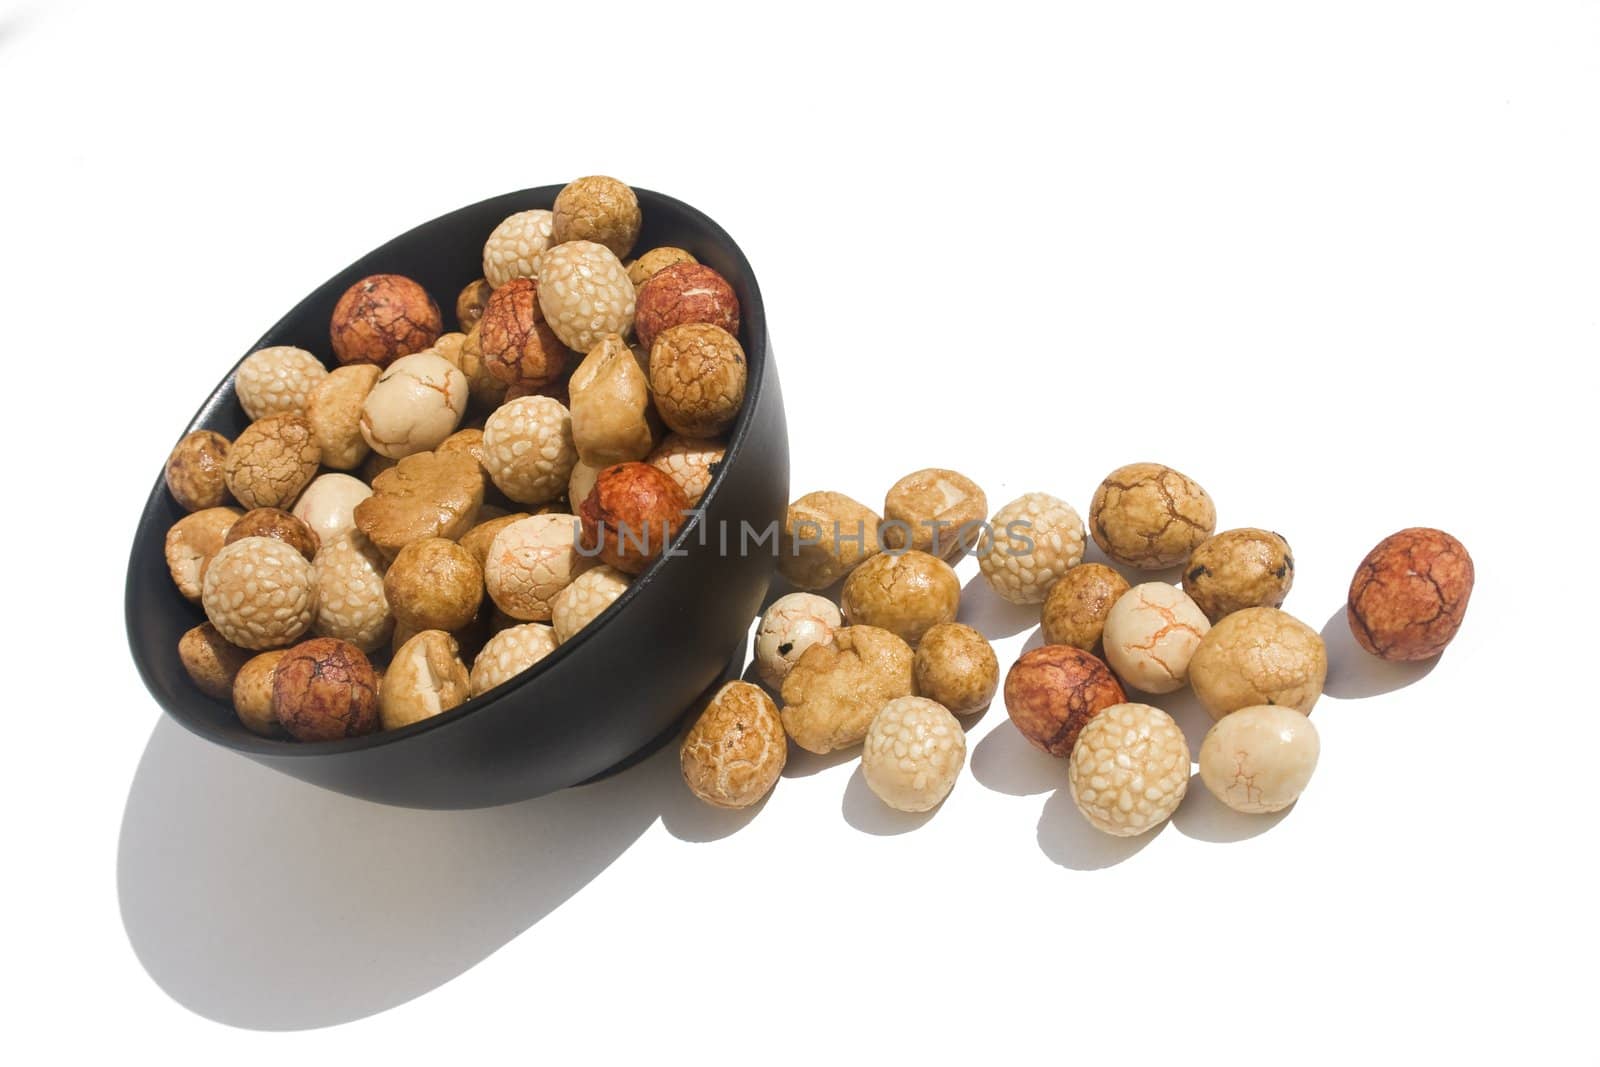 Bowl of Asian rice and sesame crackers against white background